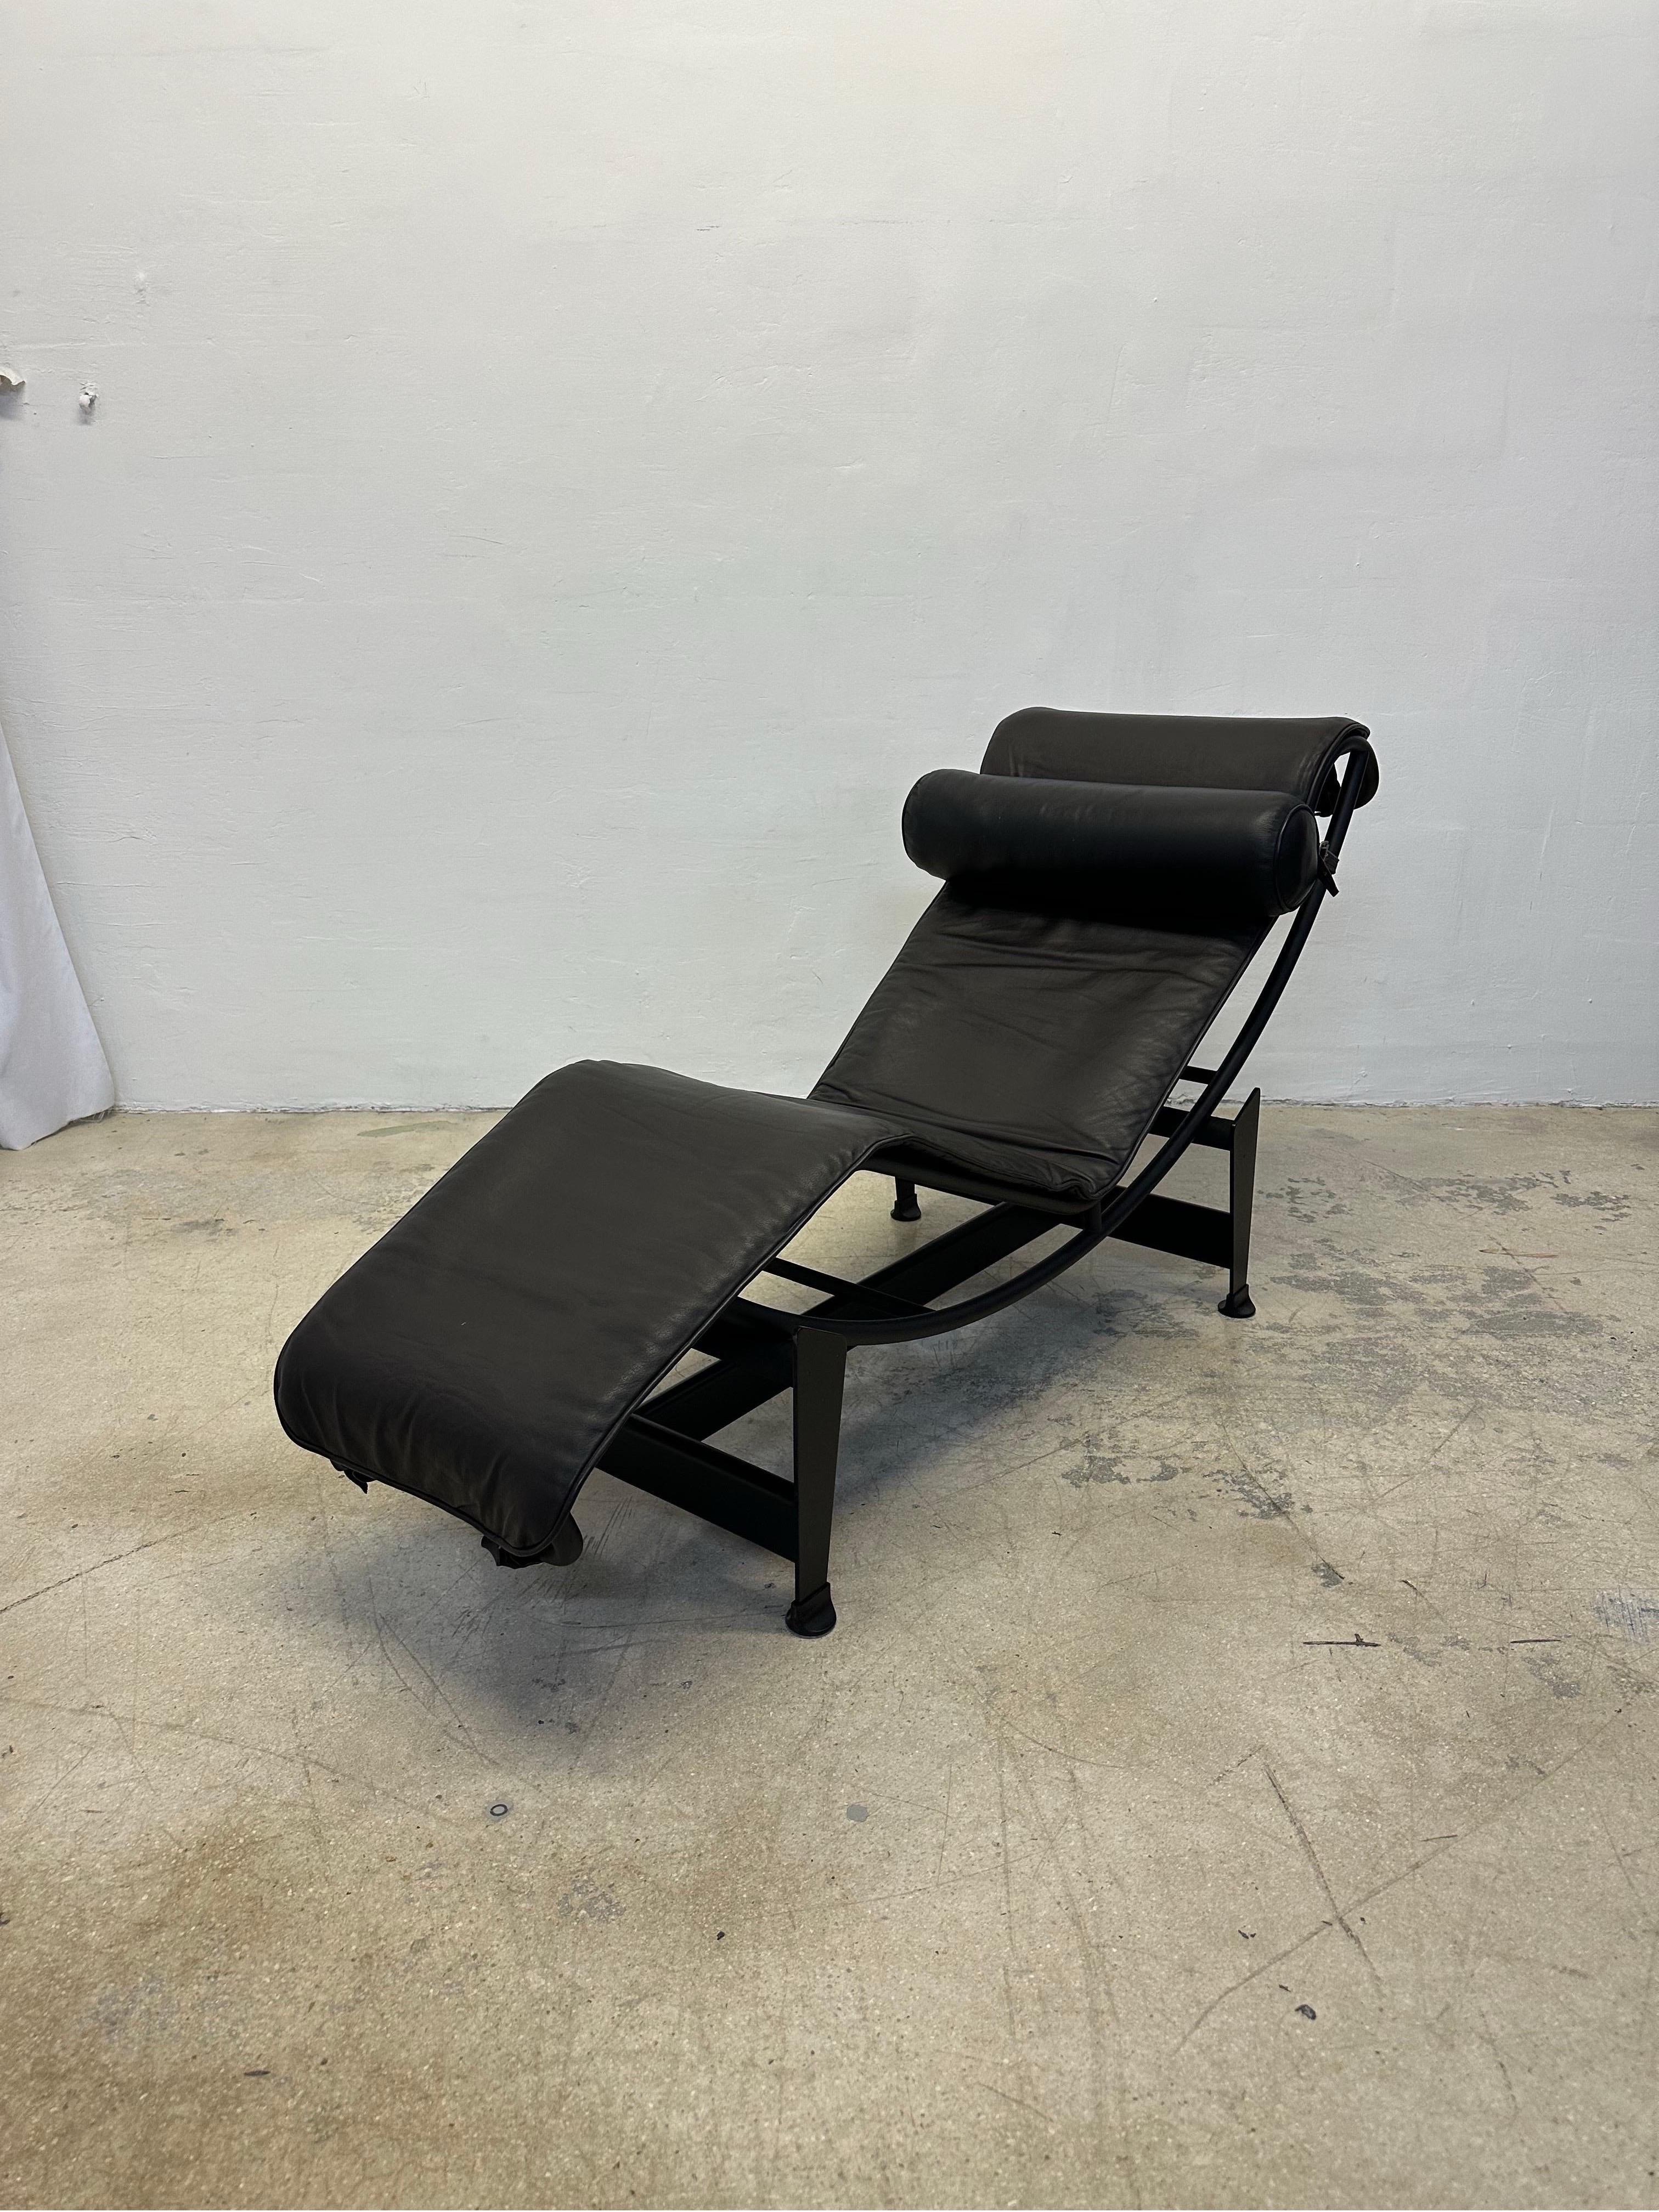 Dark Brown leather LC4 Noire chaise lounge with black leather bolster pillow on black tubular steel and black steel base by Le Corbusier, Pierre Jeanneret and Charlotte Perriand for Cassina. Signed and inscribed on the base and the chaise.

In 1922,